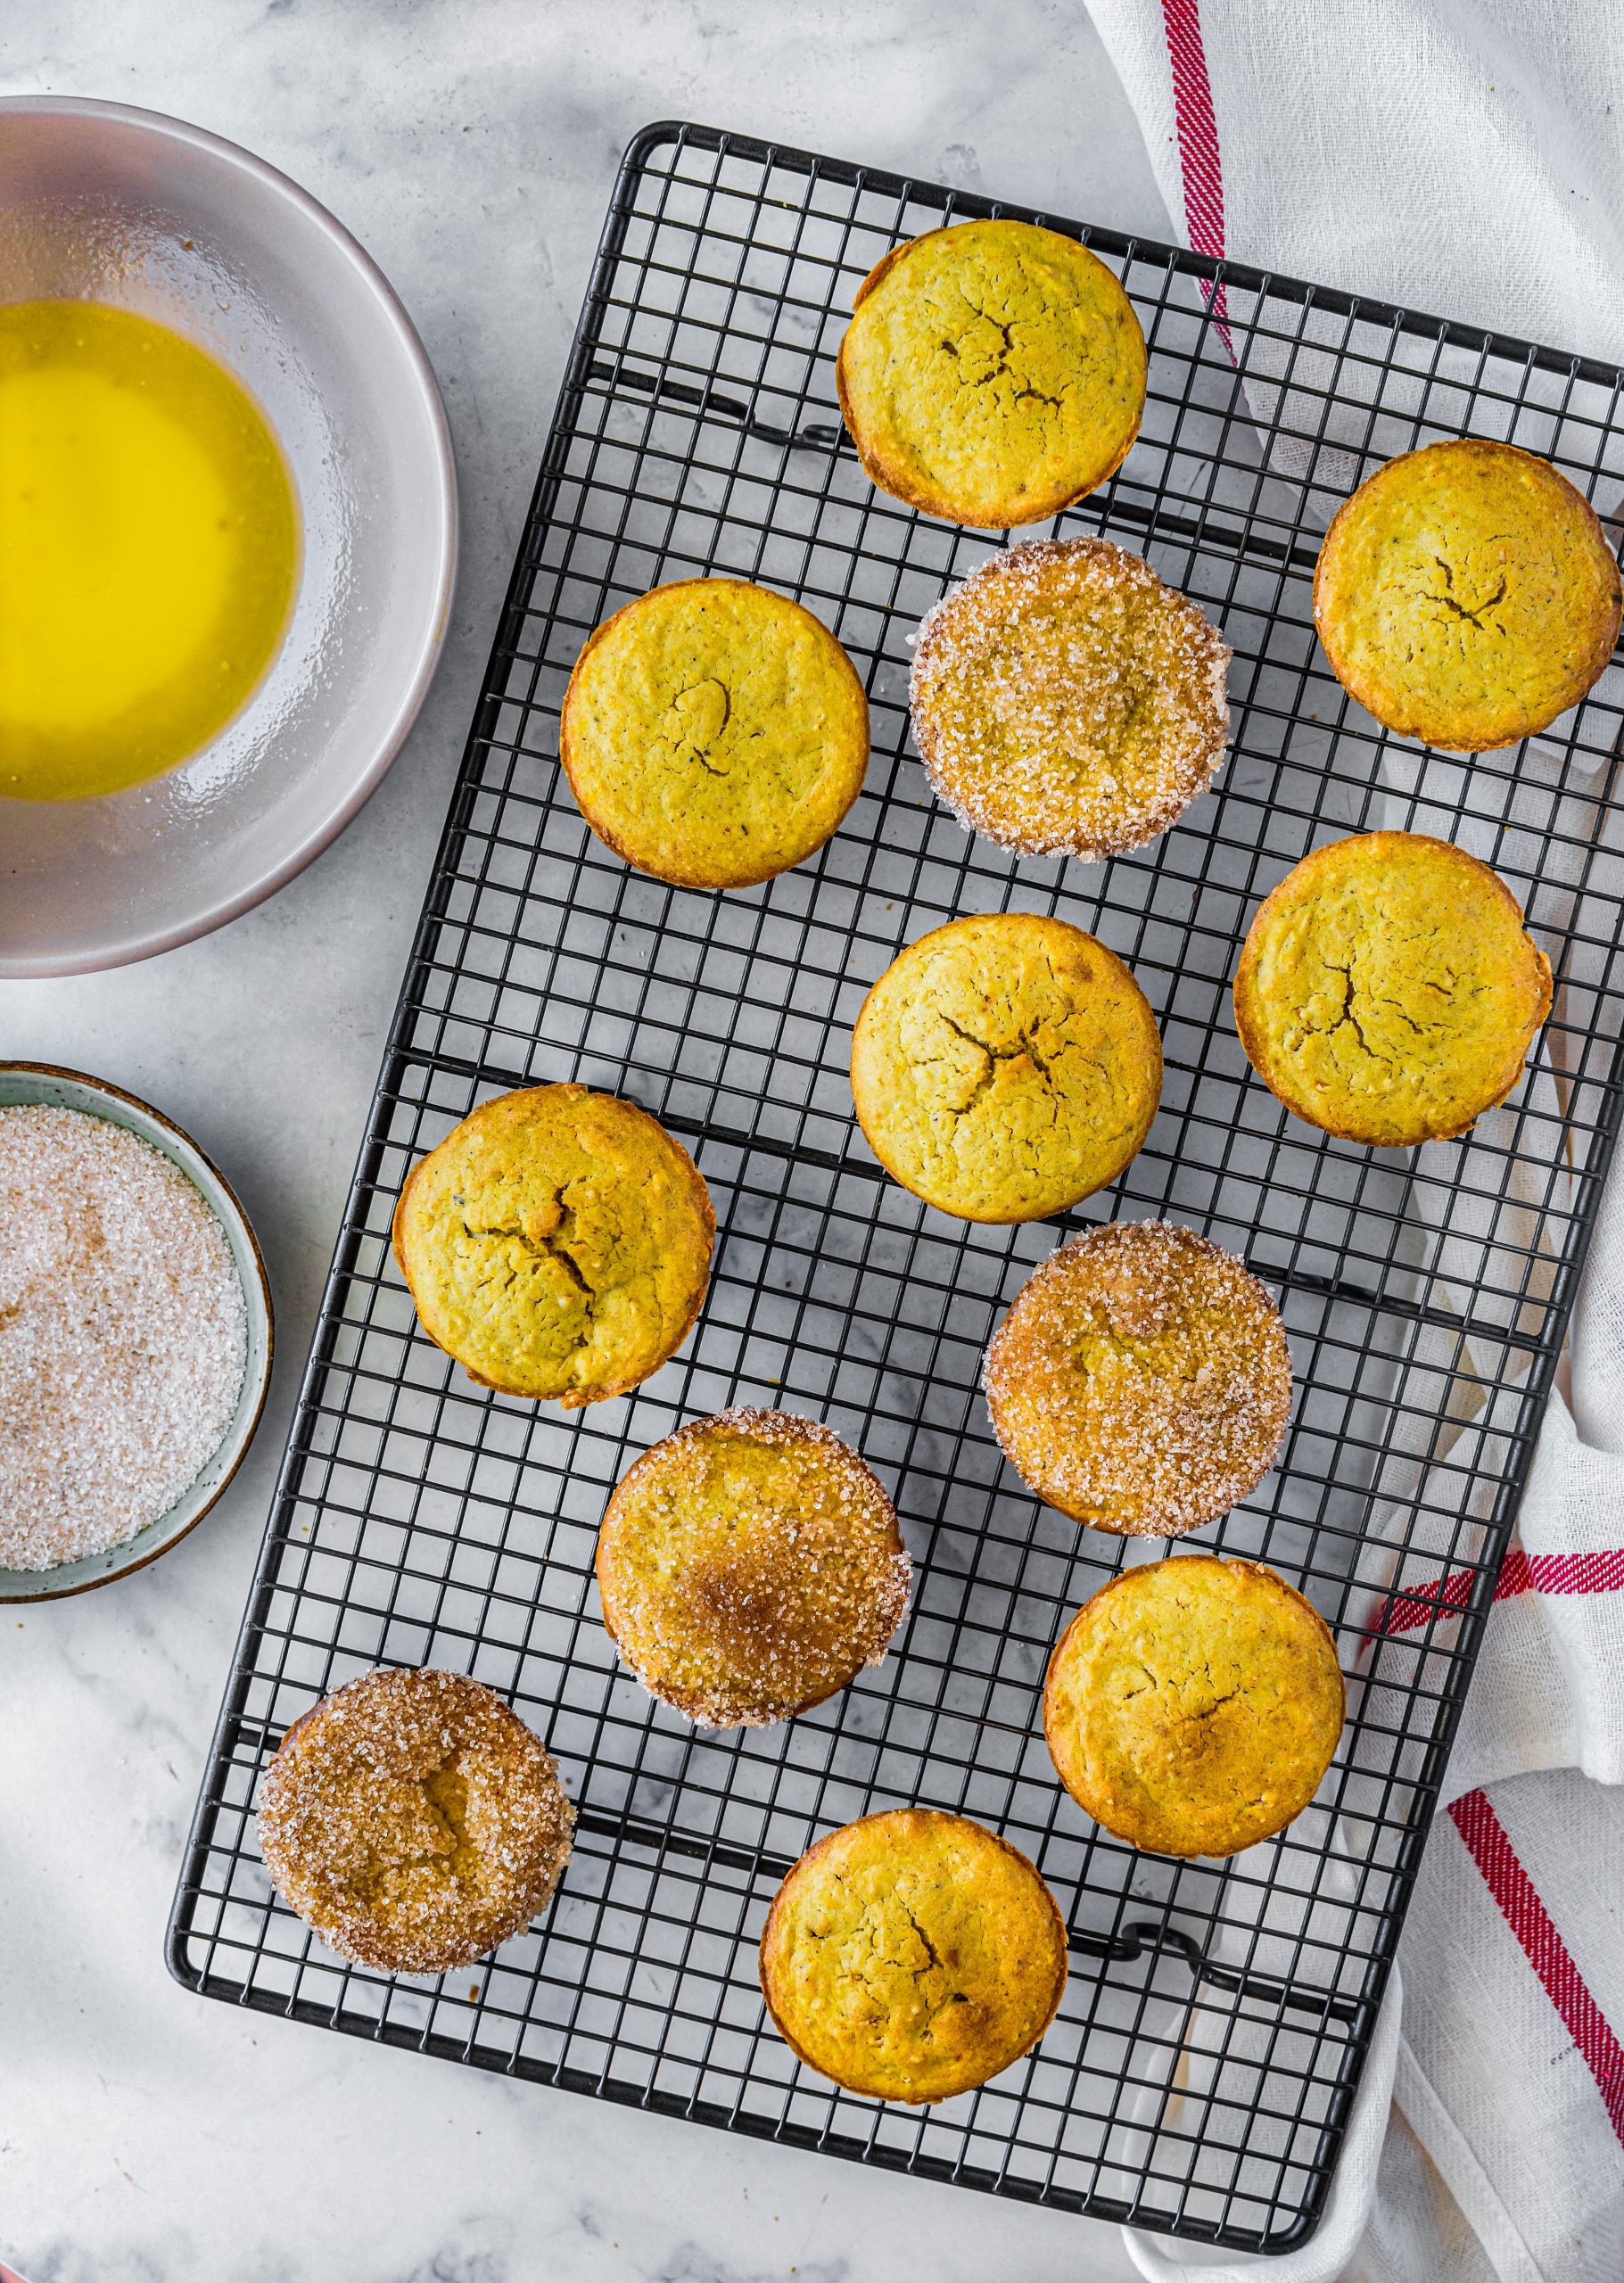 Dip each muffin into the butter, and then roll in the sugar mixture before serving. 